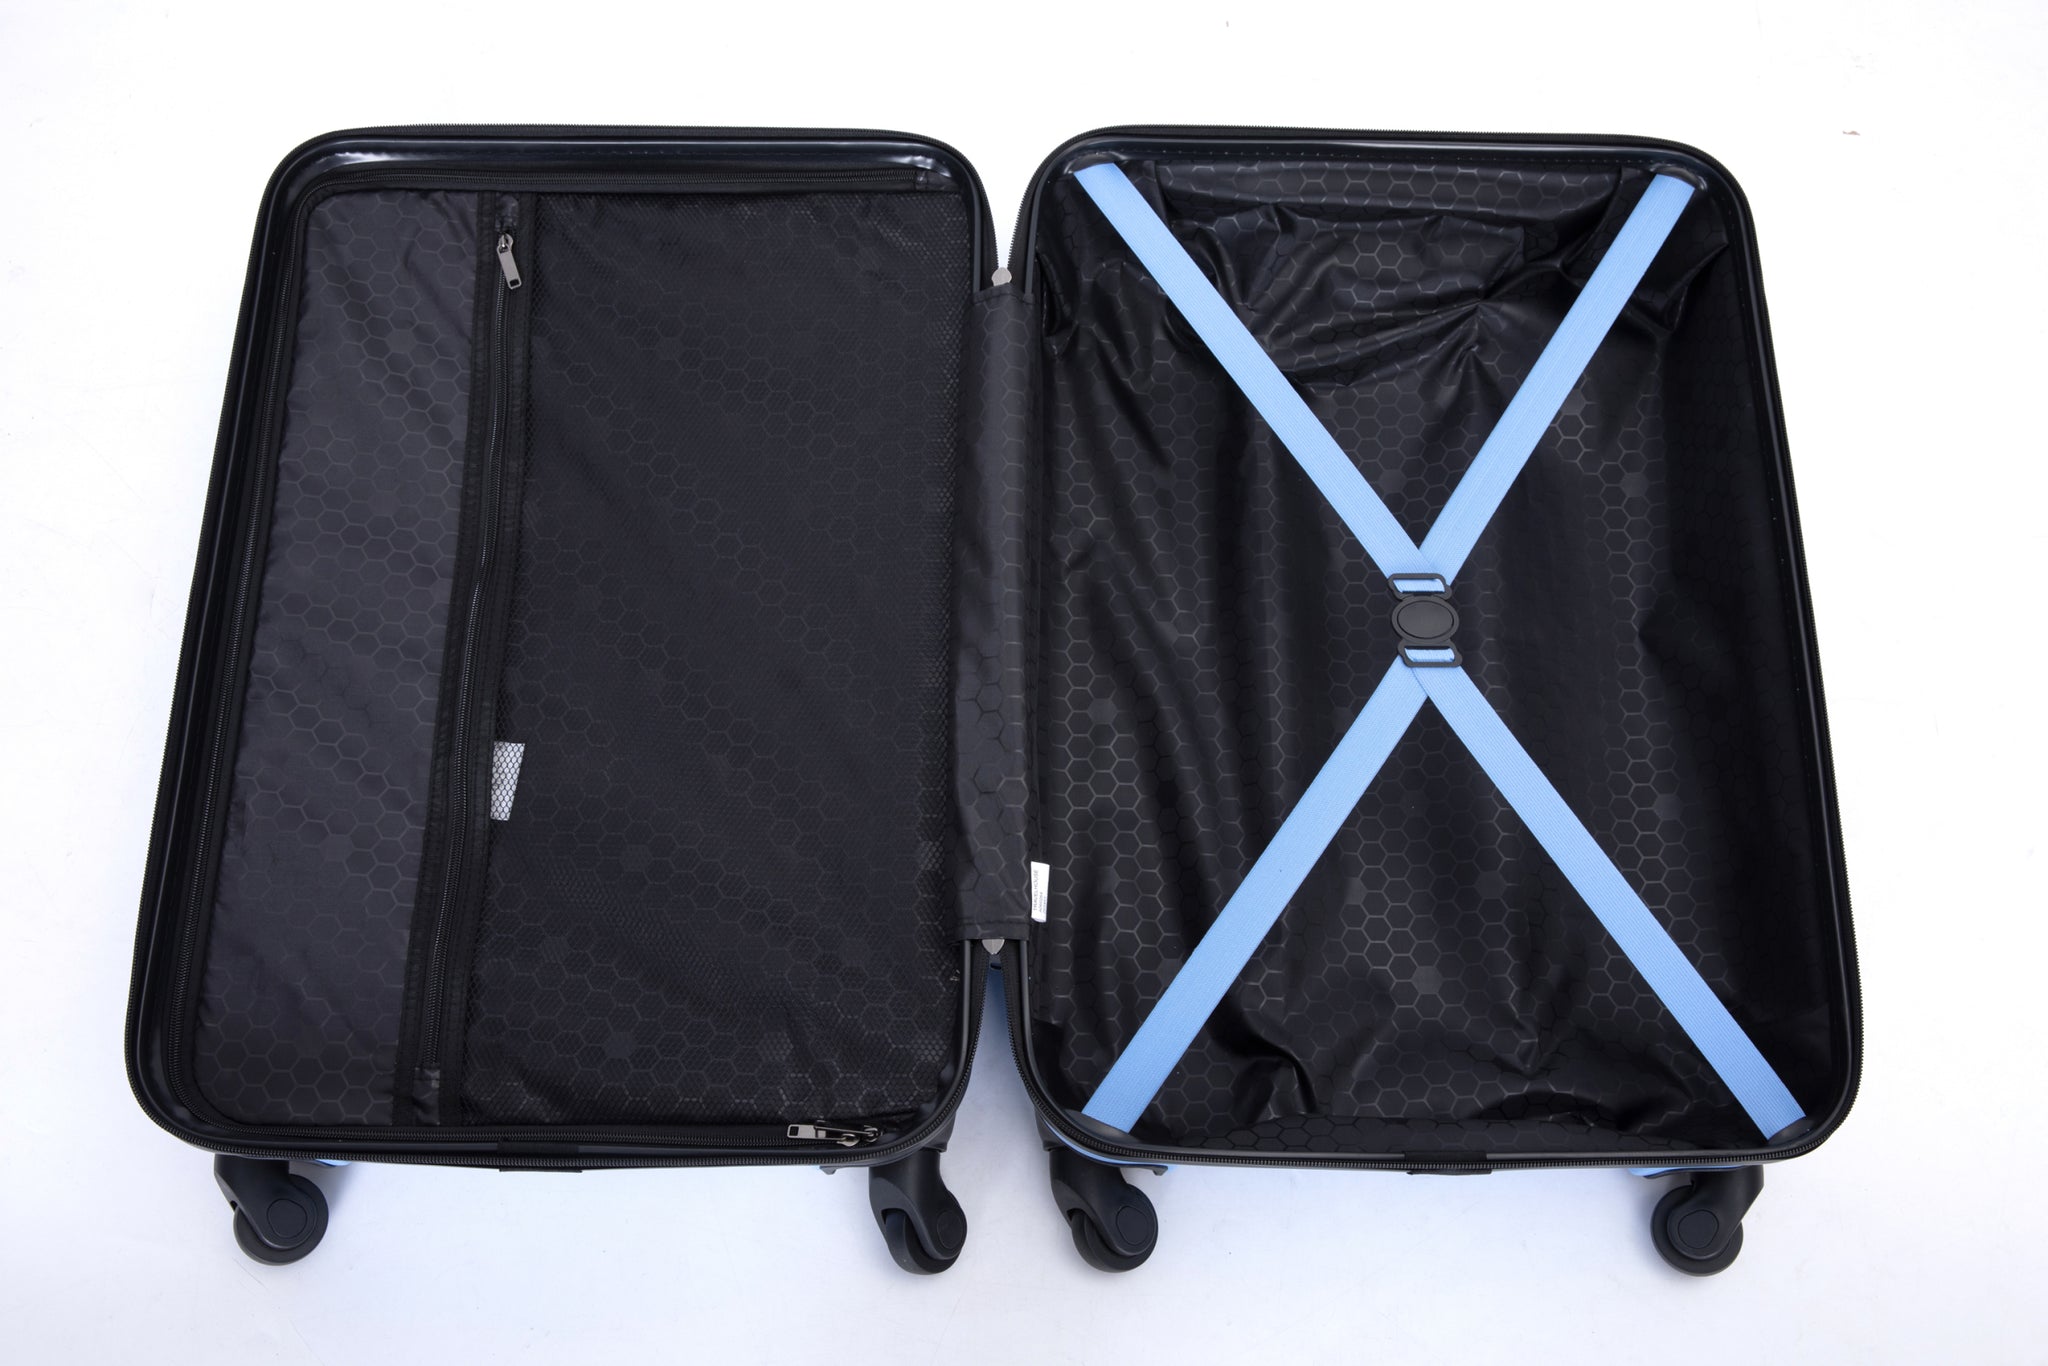 3 Piece Luggage Sets ABS Lightweight Suitcase with Two light blue-abs